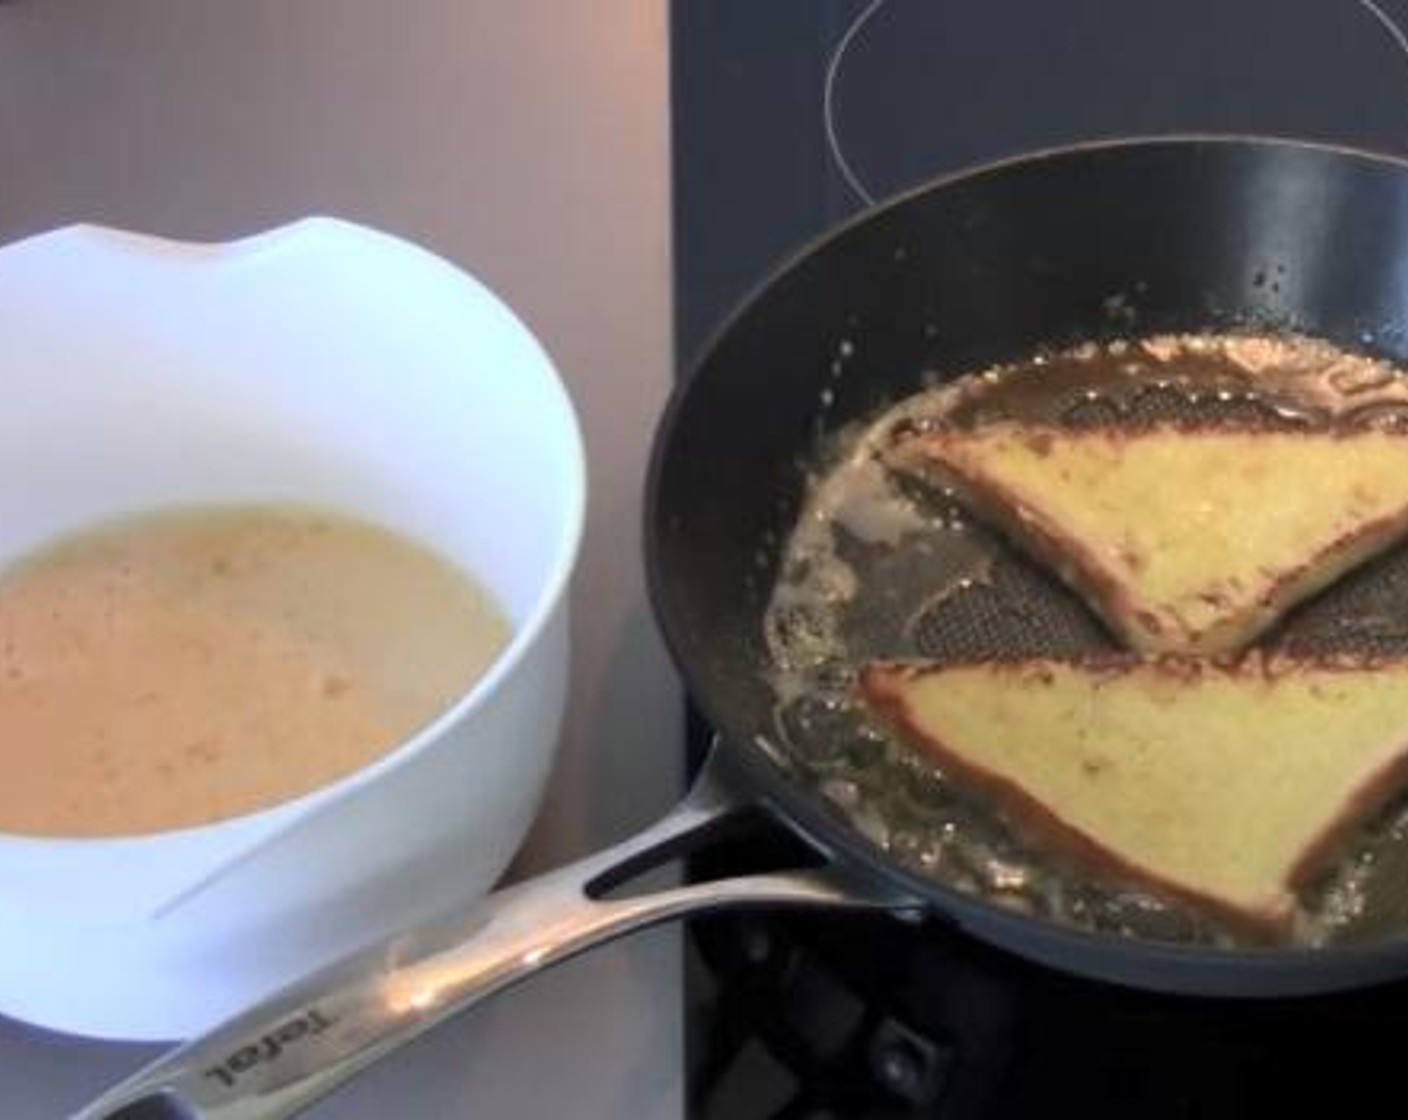 step 4 In a frying pan over medium heat, melt the Butter (2 Tbsp). Take each slice of bread, put it in the egg mixture, and fry it one minute on each side.